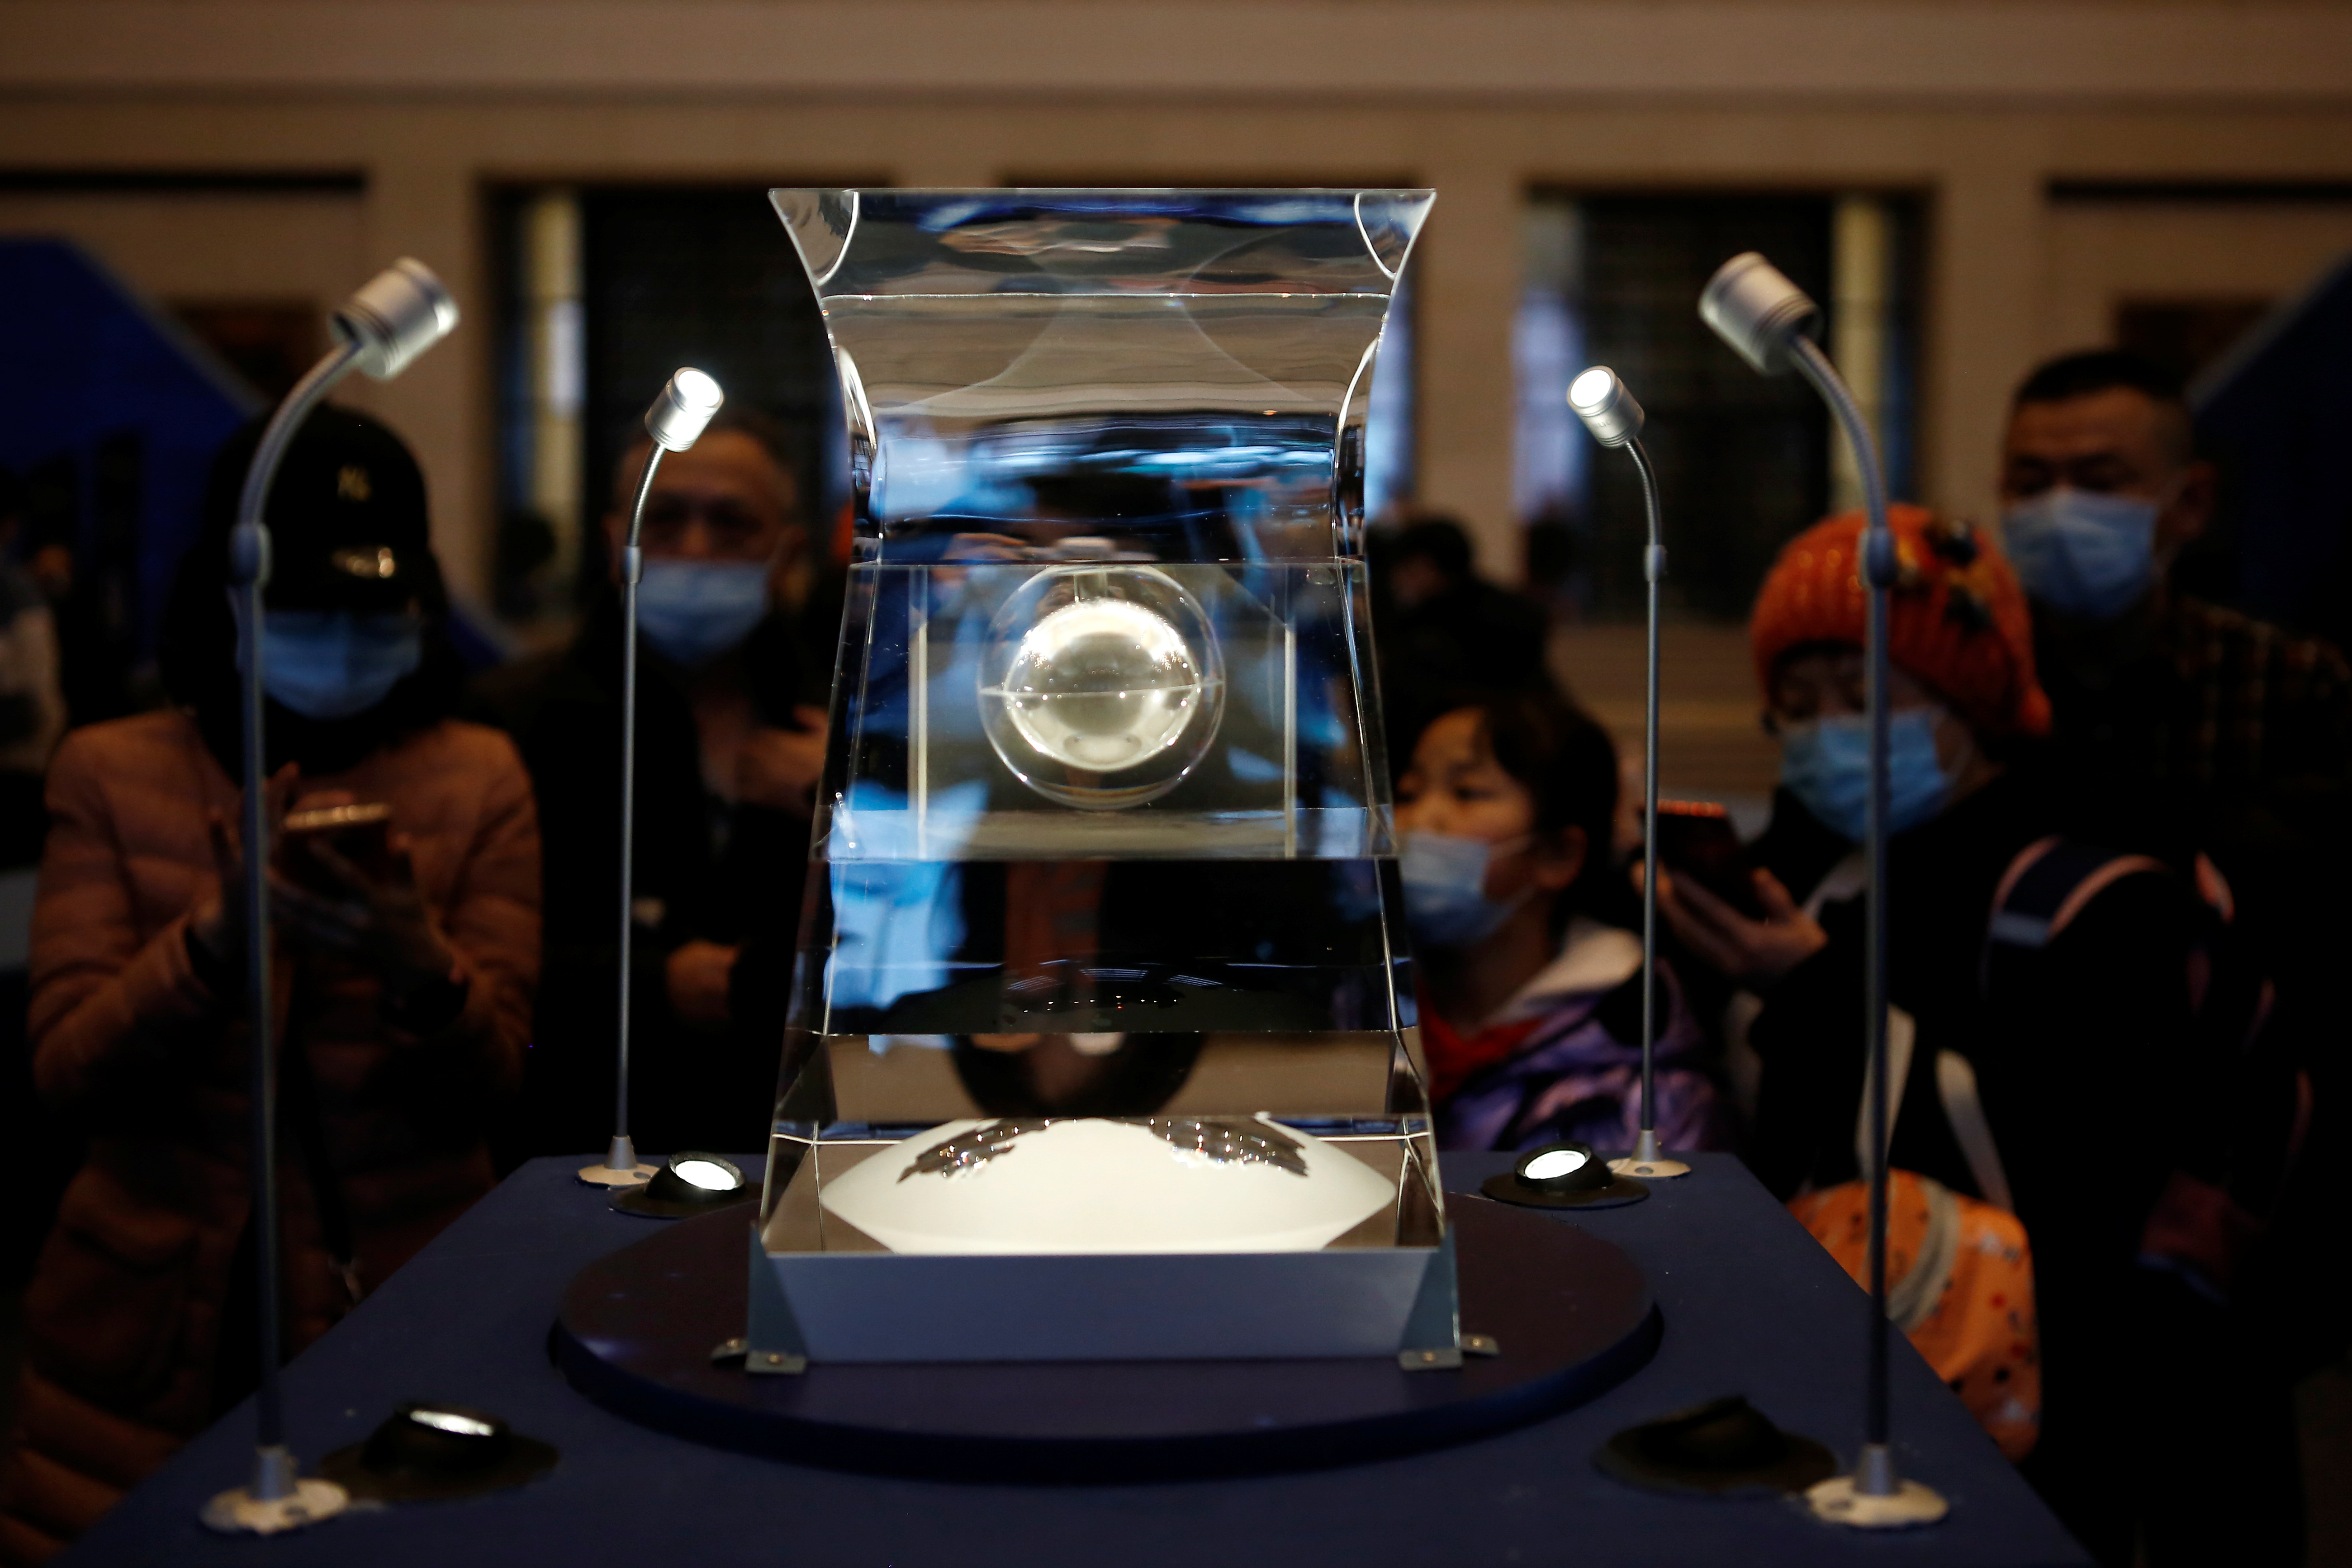 Samples from China's lunar exploration program Chang'e-5 Mission at National Museum in Beijing